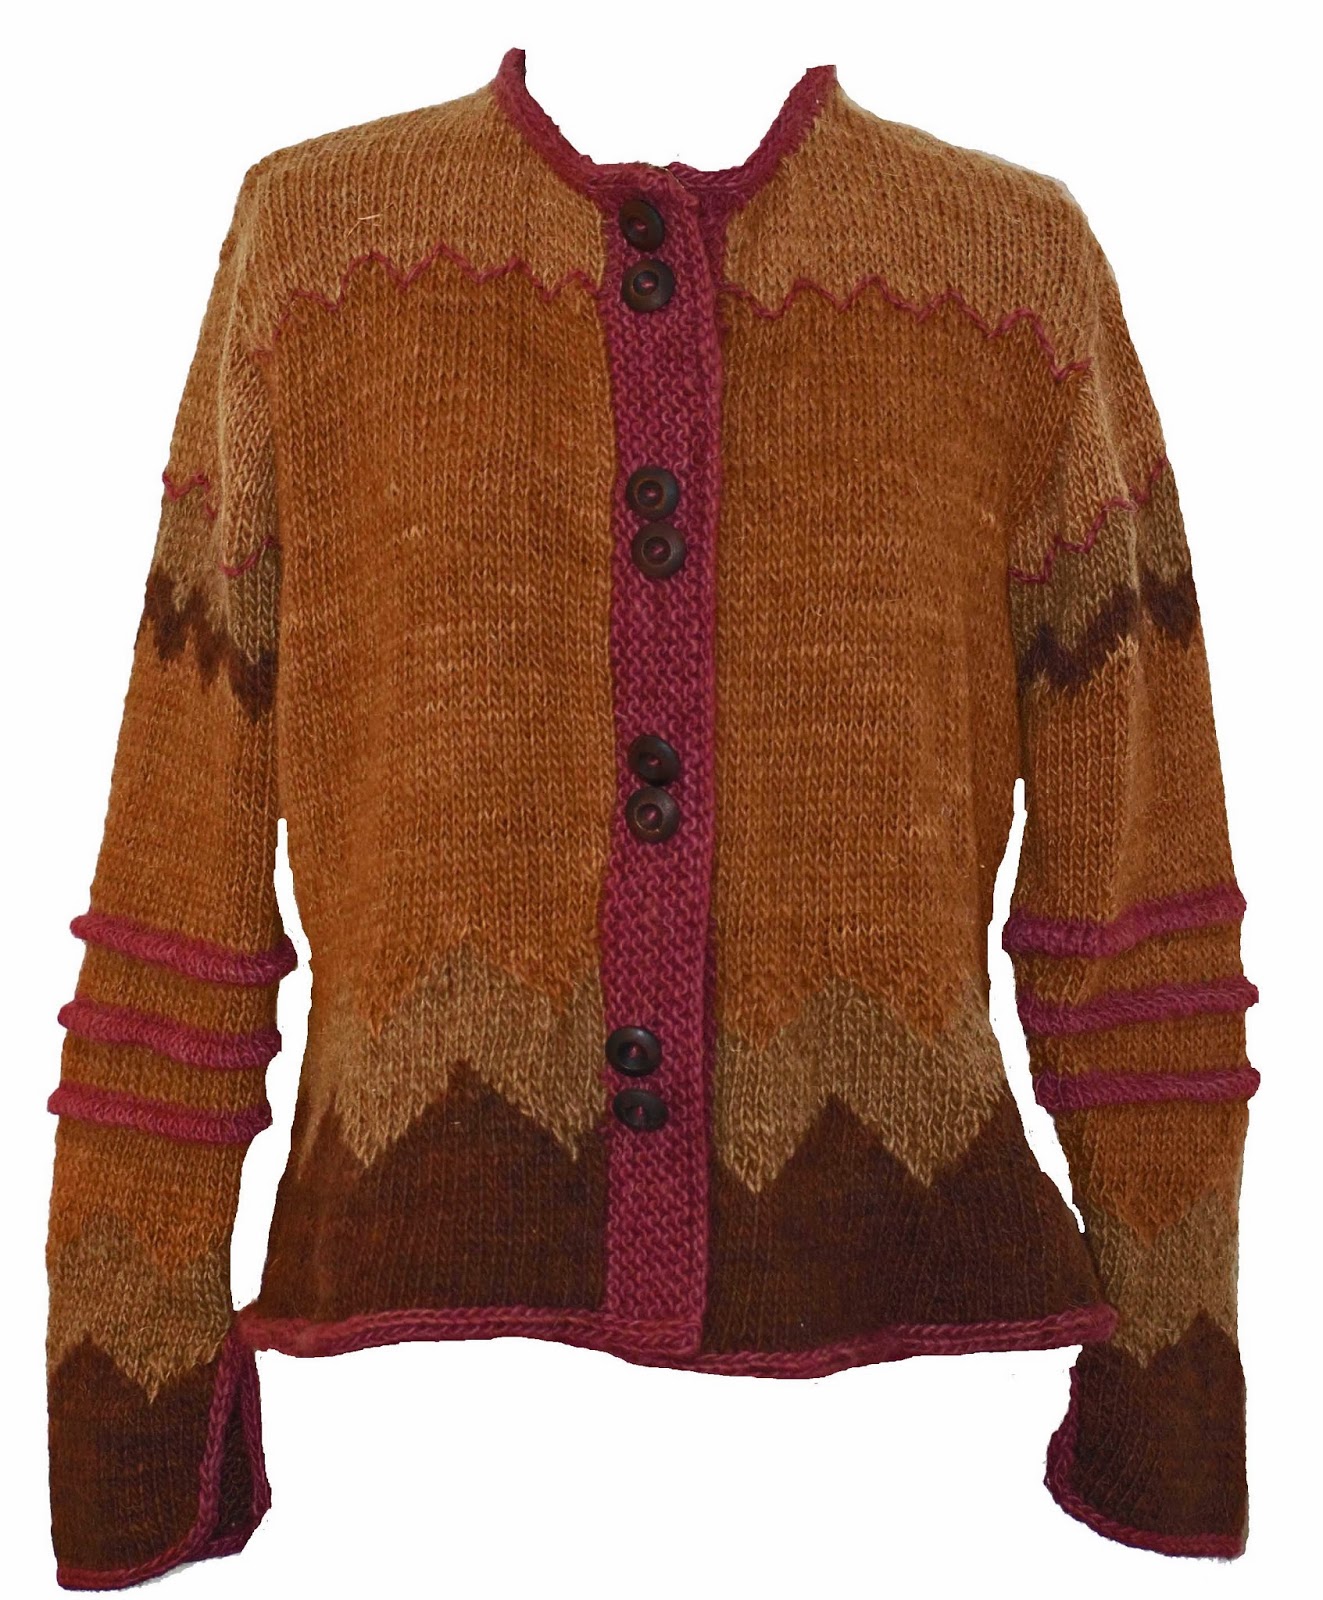 With needle and stick: The Lightning Cardigan: A Collaboration with a ...